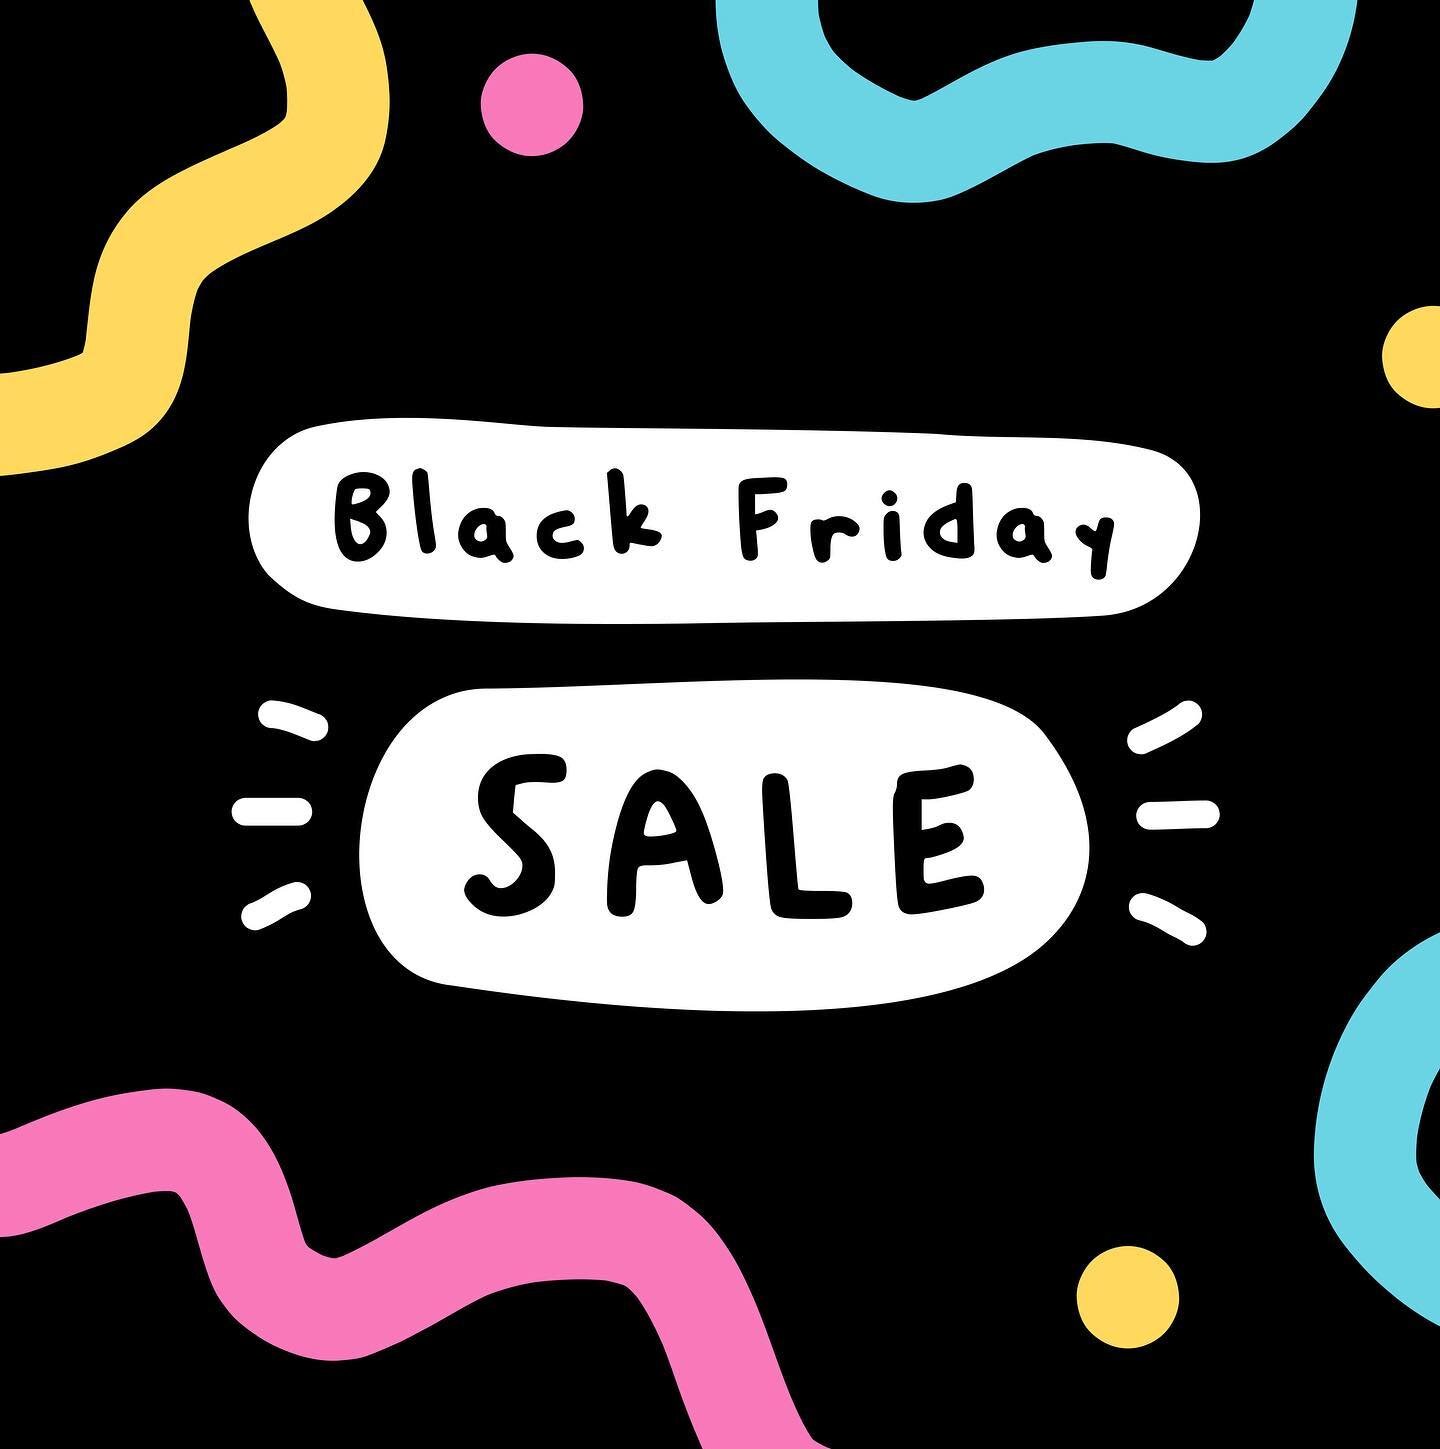 📣(EARLY) BLACK FRIDAY SALE 📣

We&rsquo;re feeling generous and very pregnant over here at November Tango, so kicking off our Black Friday Sale with 20% EVERYTHING starting from NOW ⚡️

Enter the code BLACKFRIDAYBABY at the checkout for 20% off your